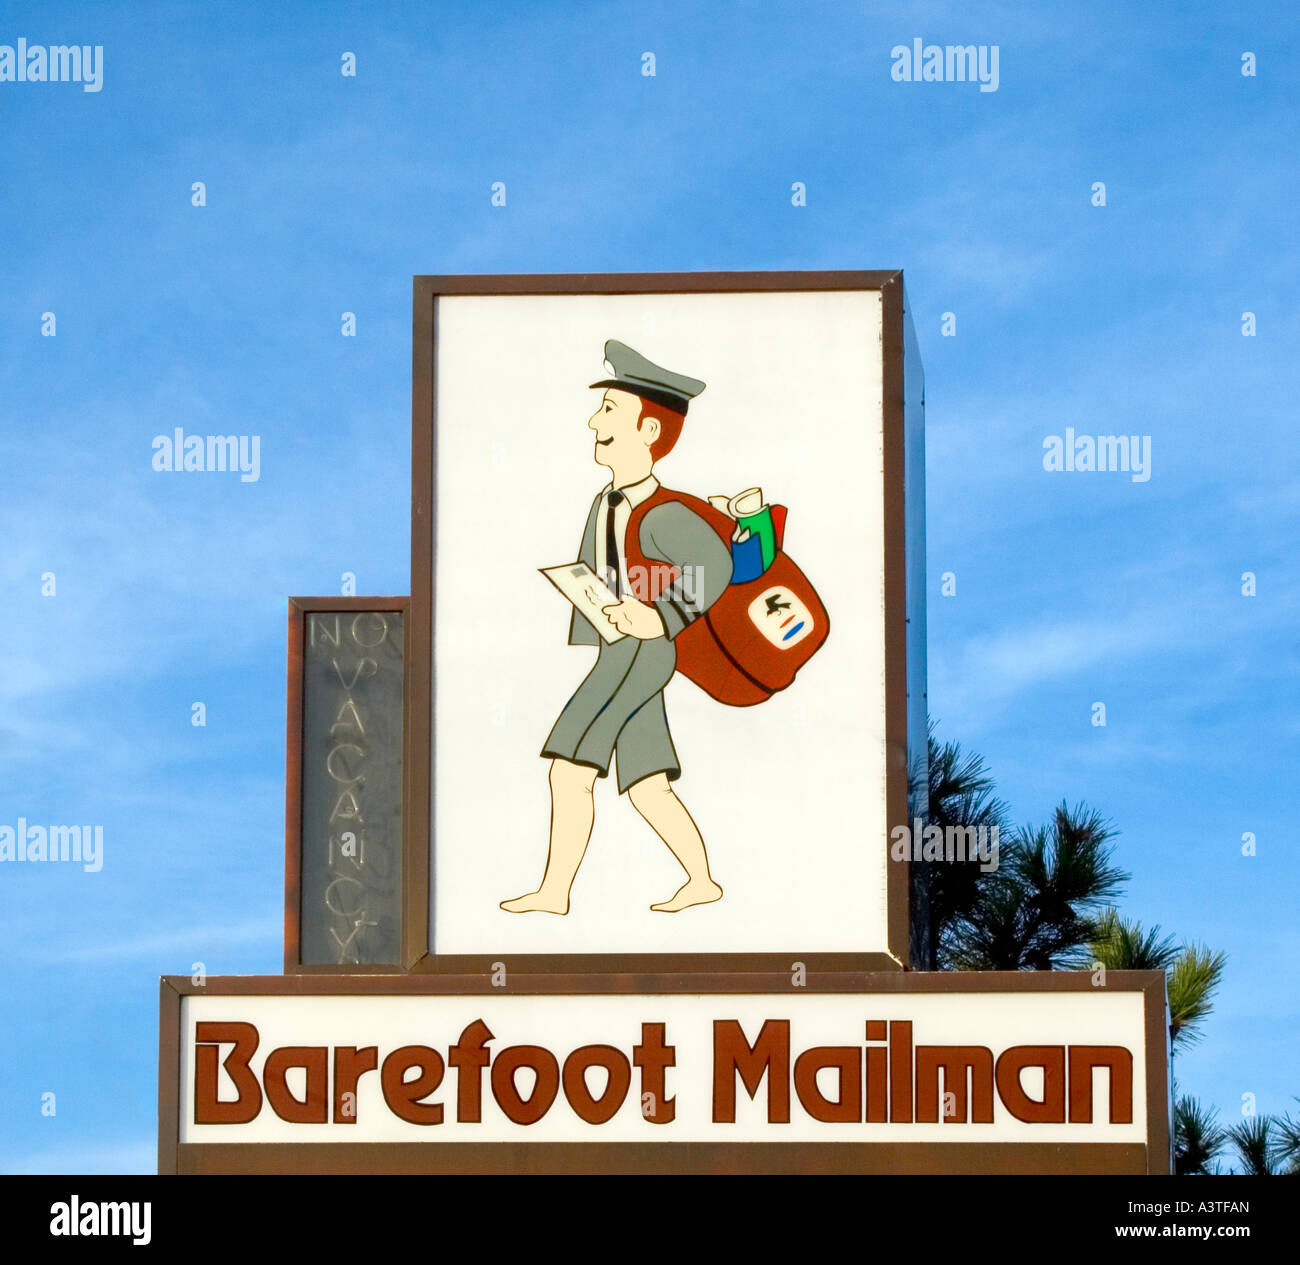 Barefoot Mailman motel sign in Ocean City Maryland Stock Photo